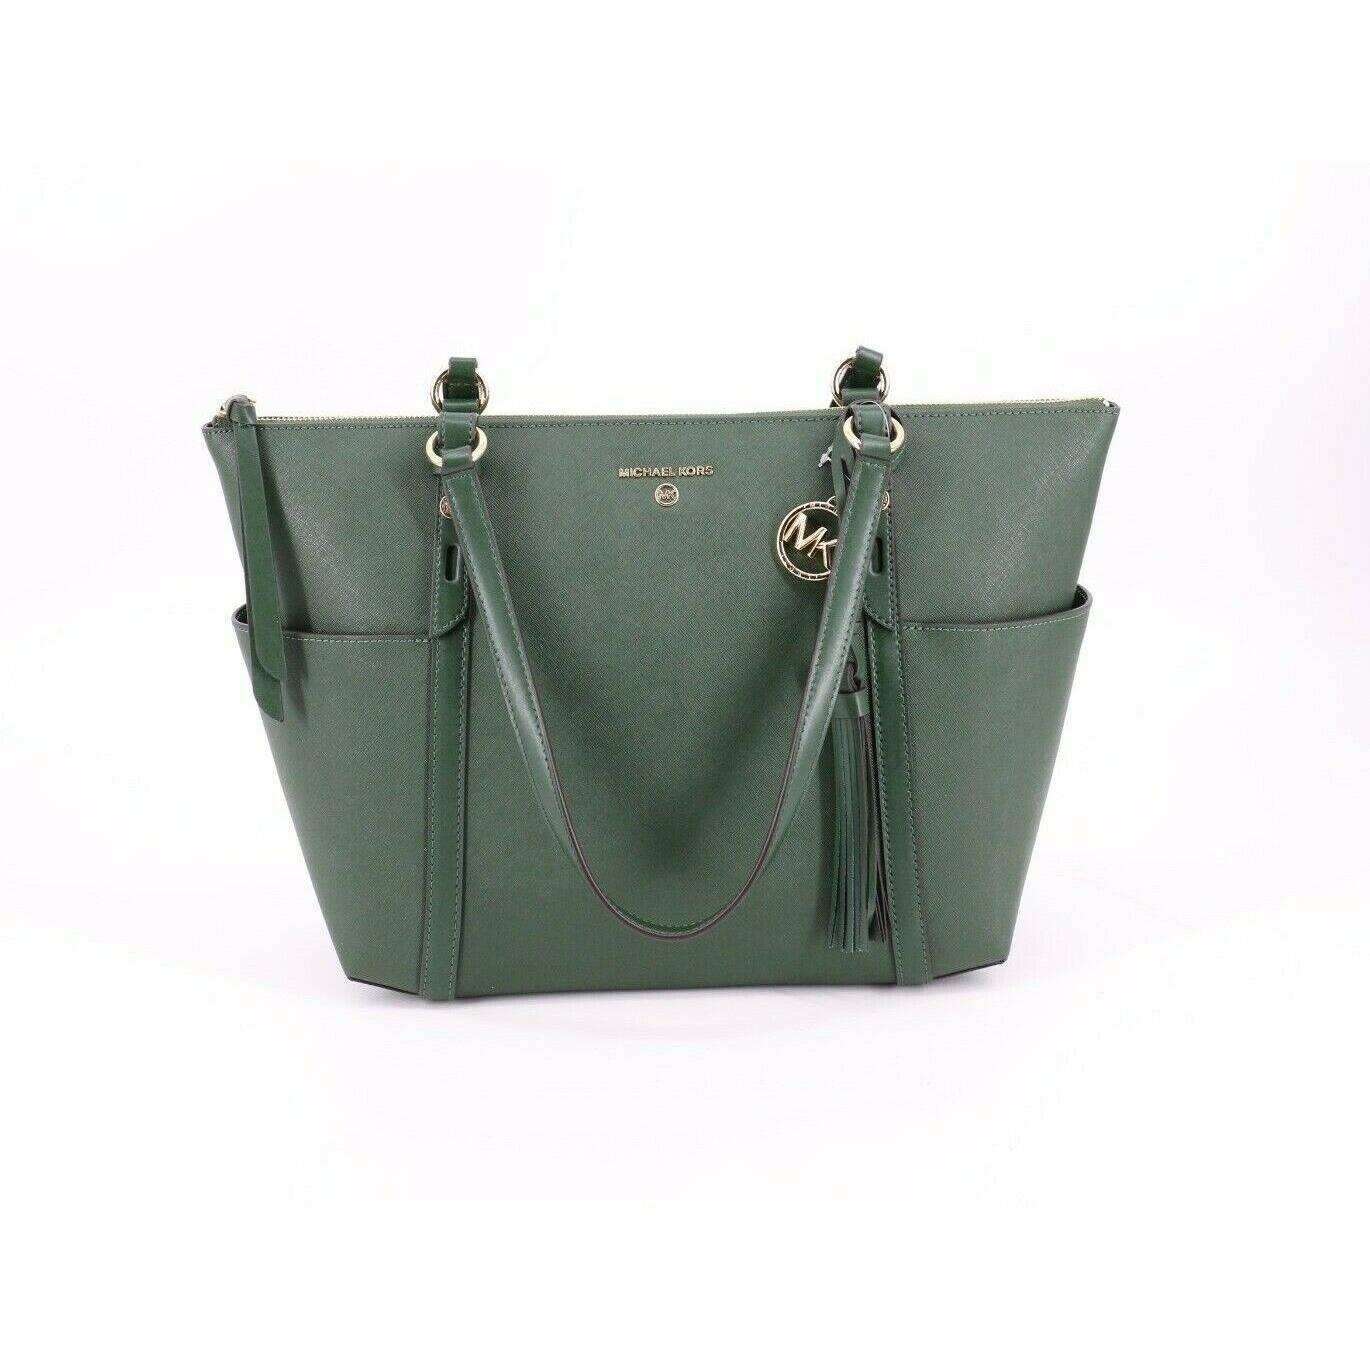 Michael Kors Nomad Large Top Zip Tote Bag Purse Moss Green Gold Hardware